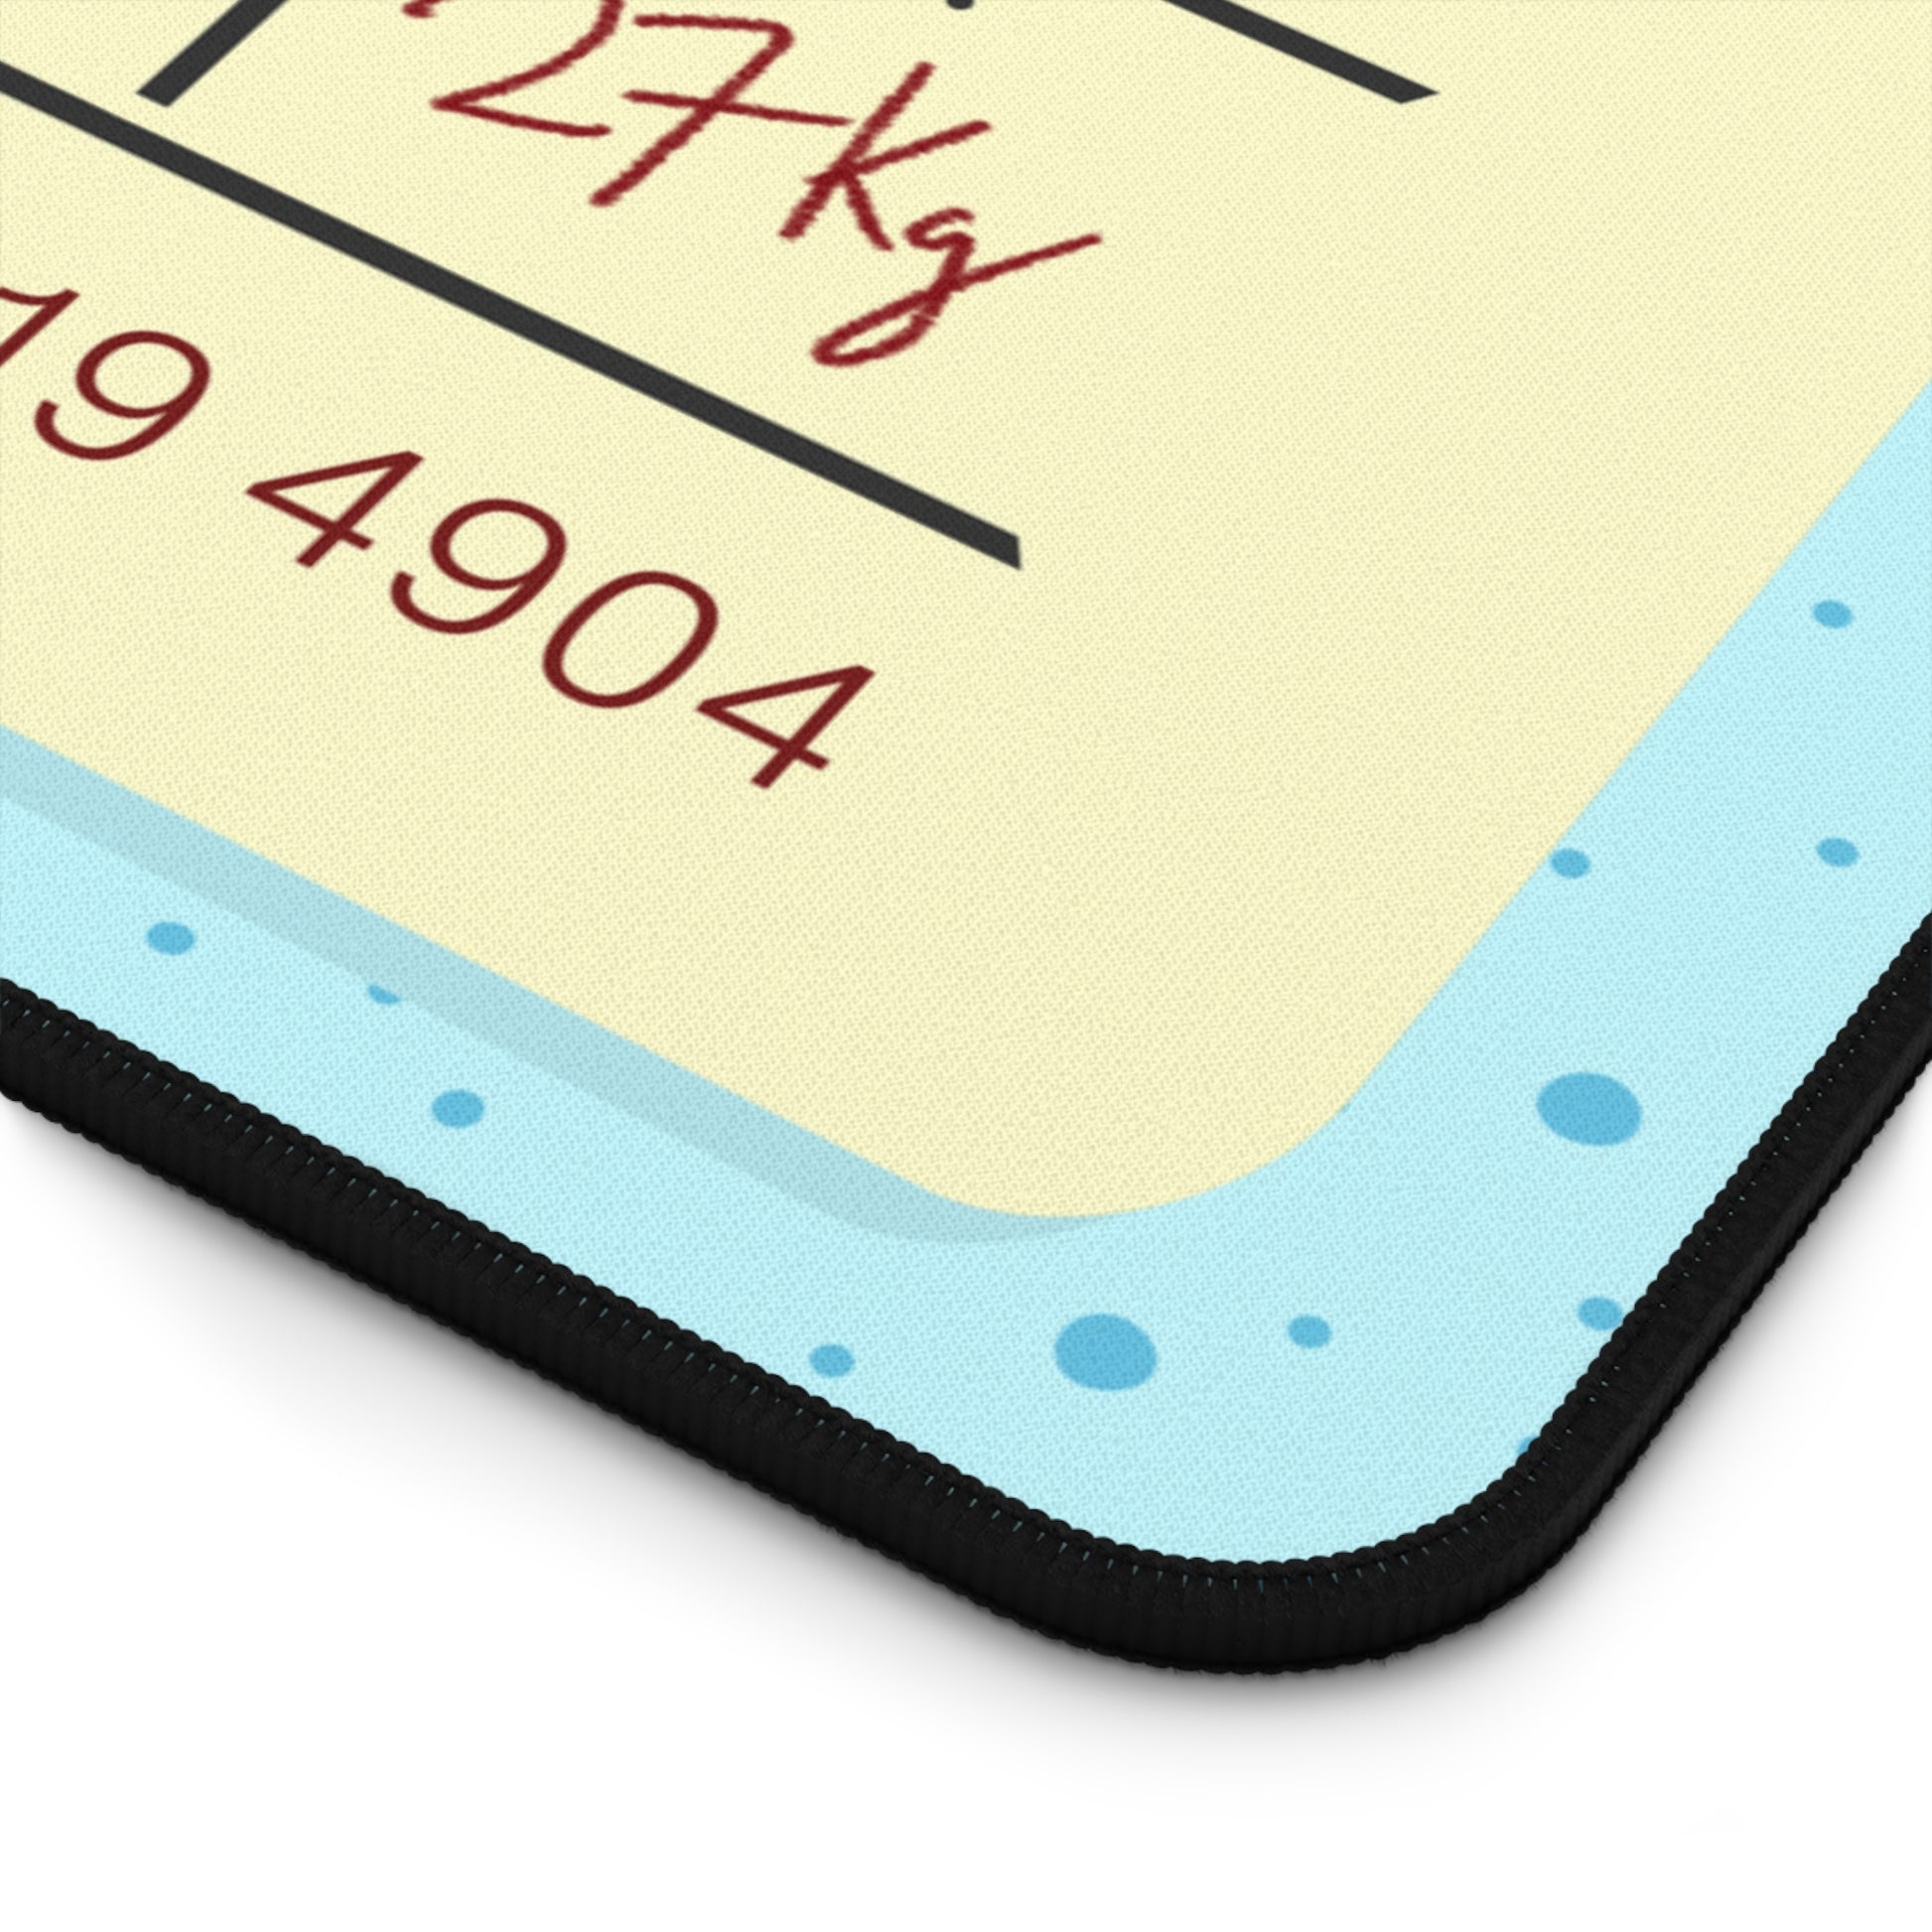 The corner of a 12" x 22" desk mat with a dotted blue background and a blue and yellow Tokyo airline baggage tag on it.